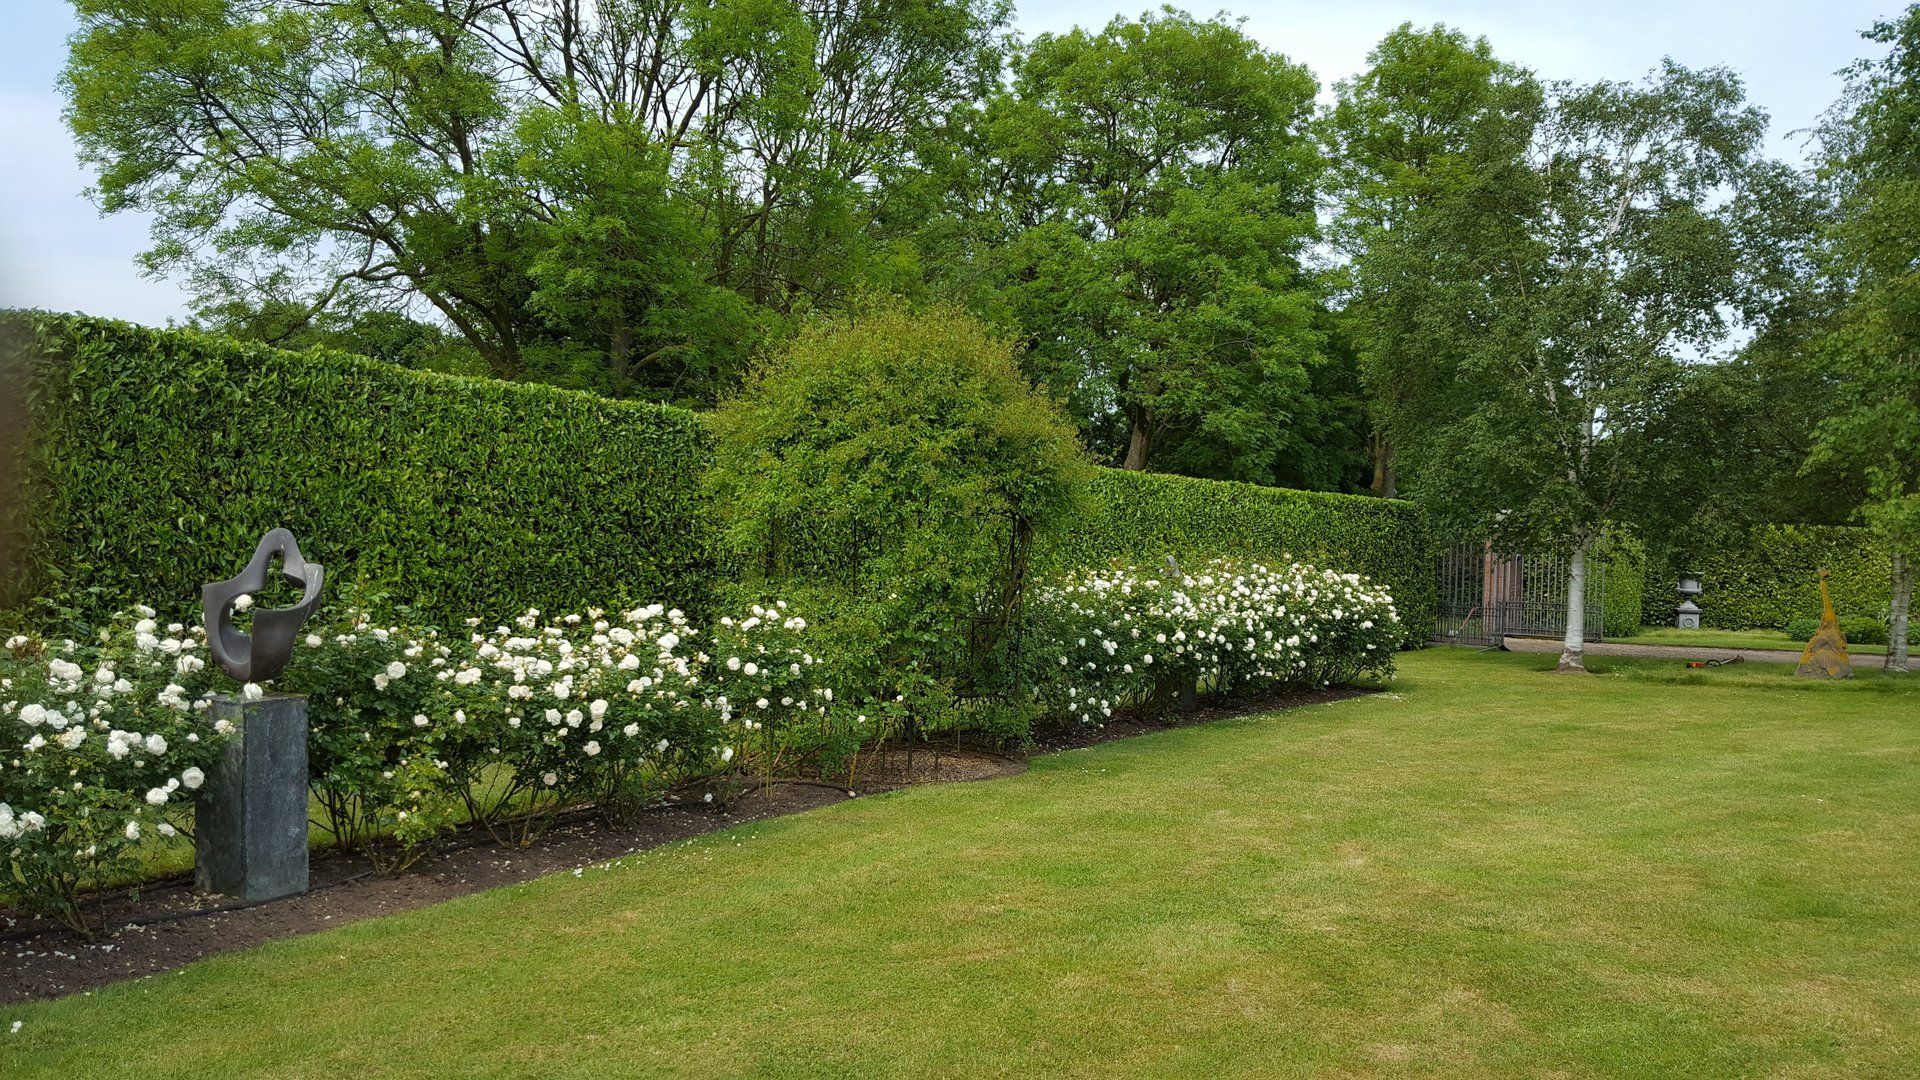 Neatly trimmed hedge behind white flowerbed and ornament